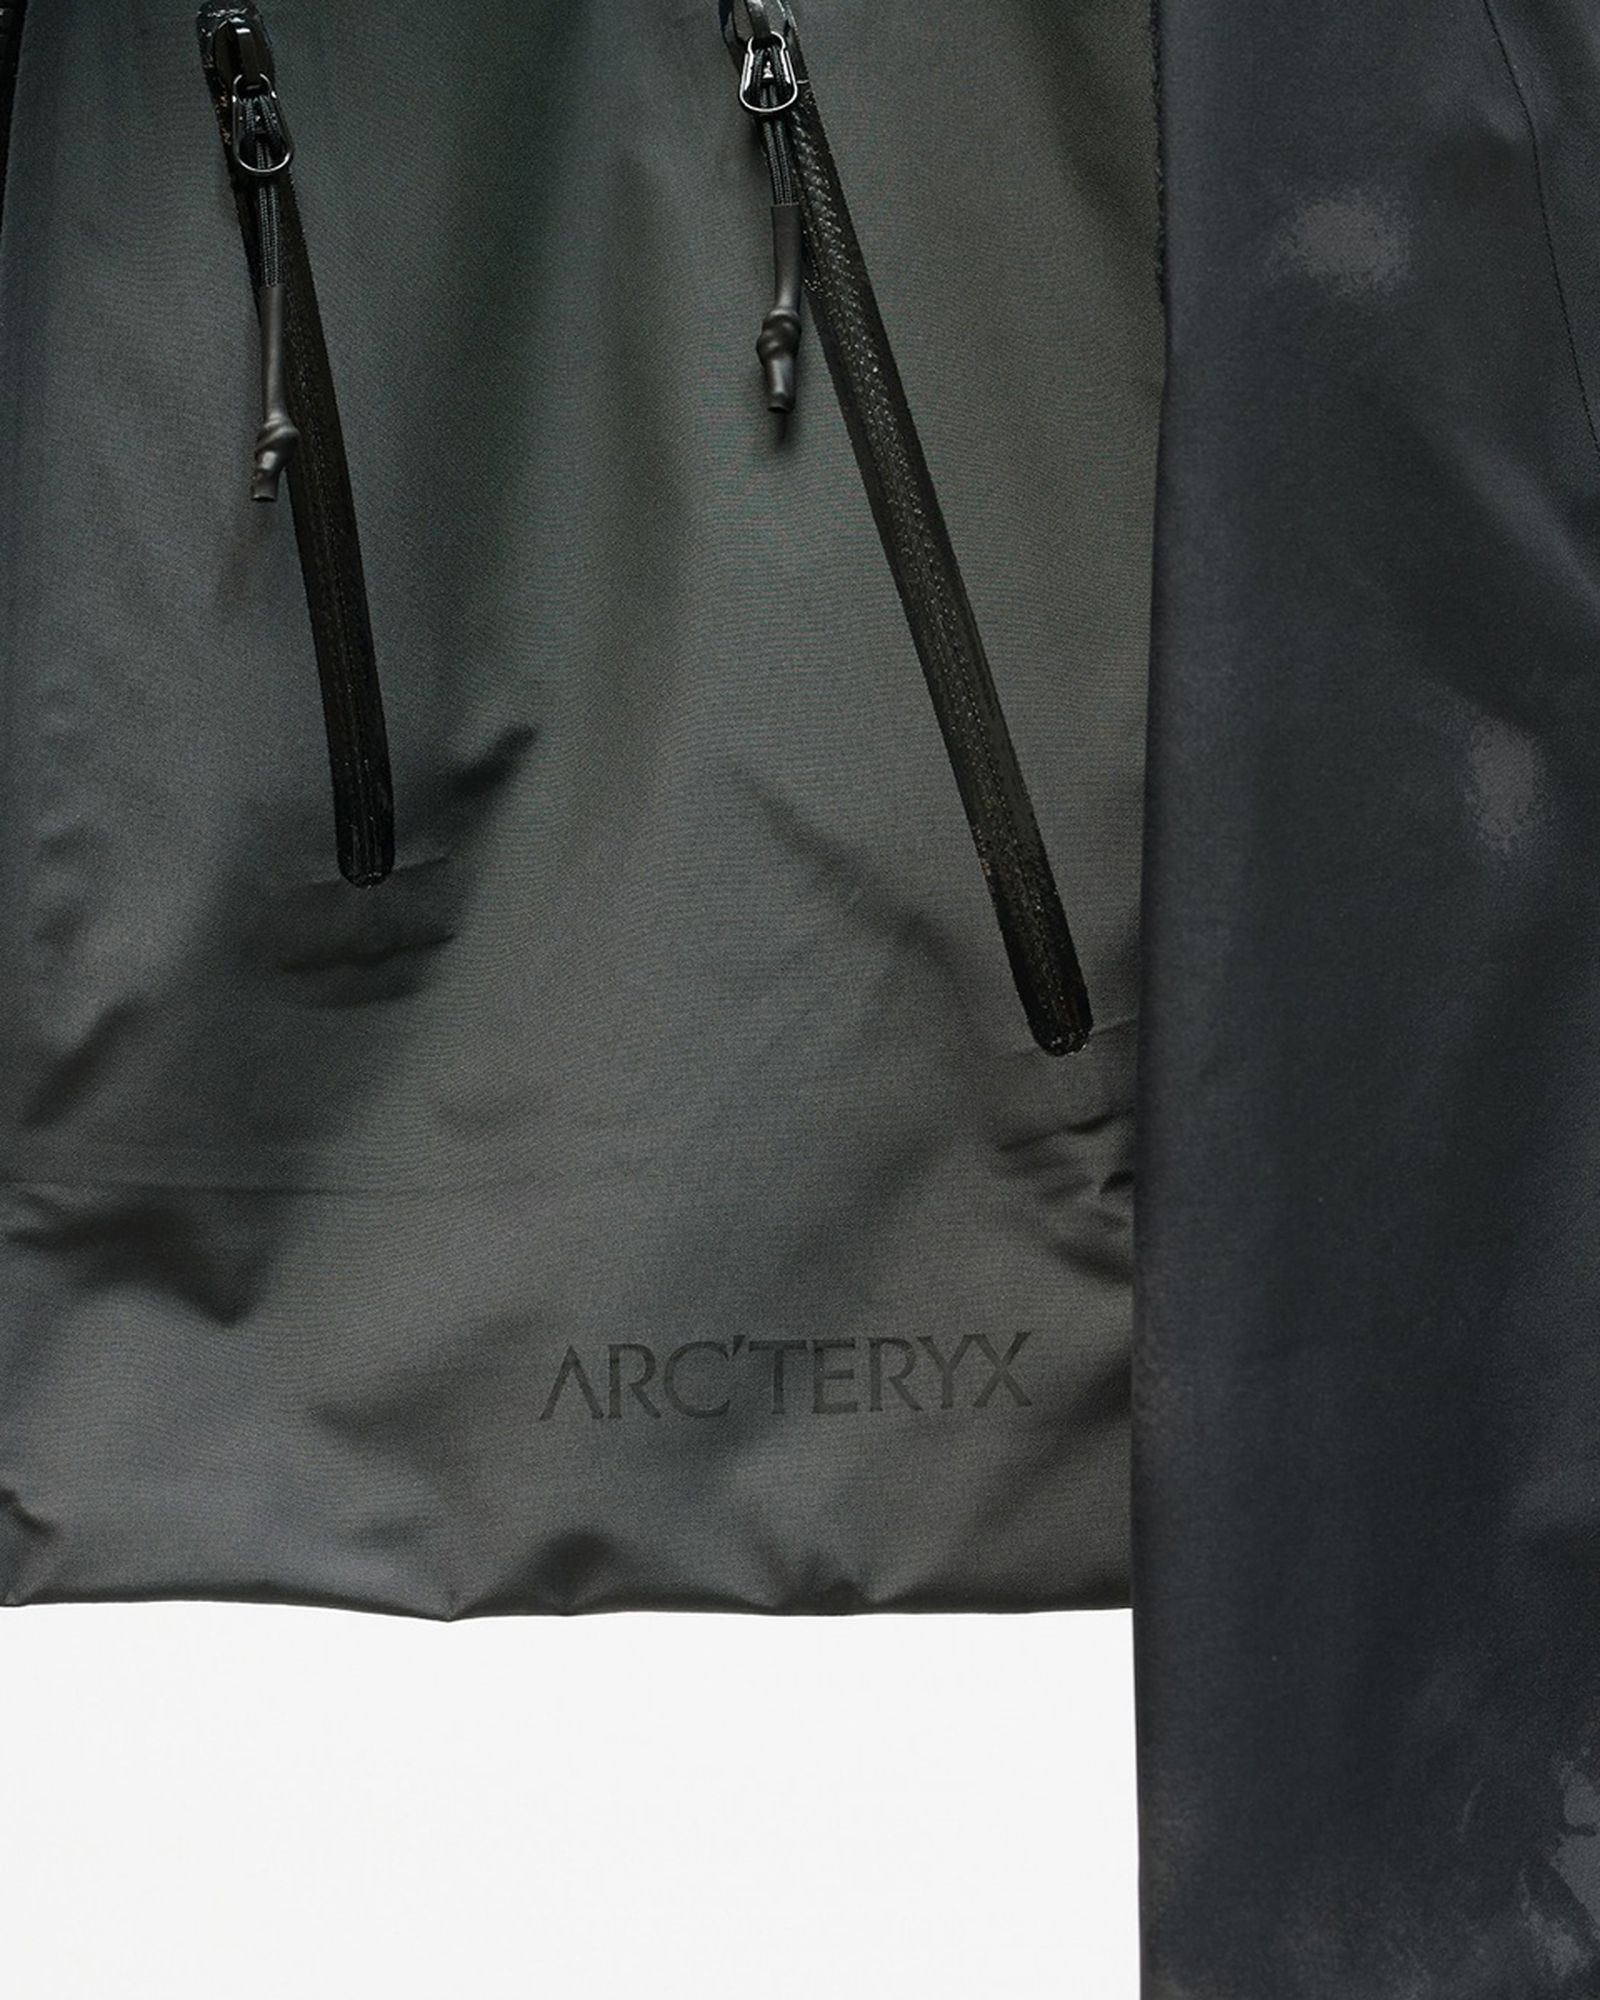 arcteryx-system-a-collection-three-ss22-release (22)